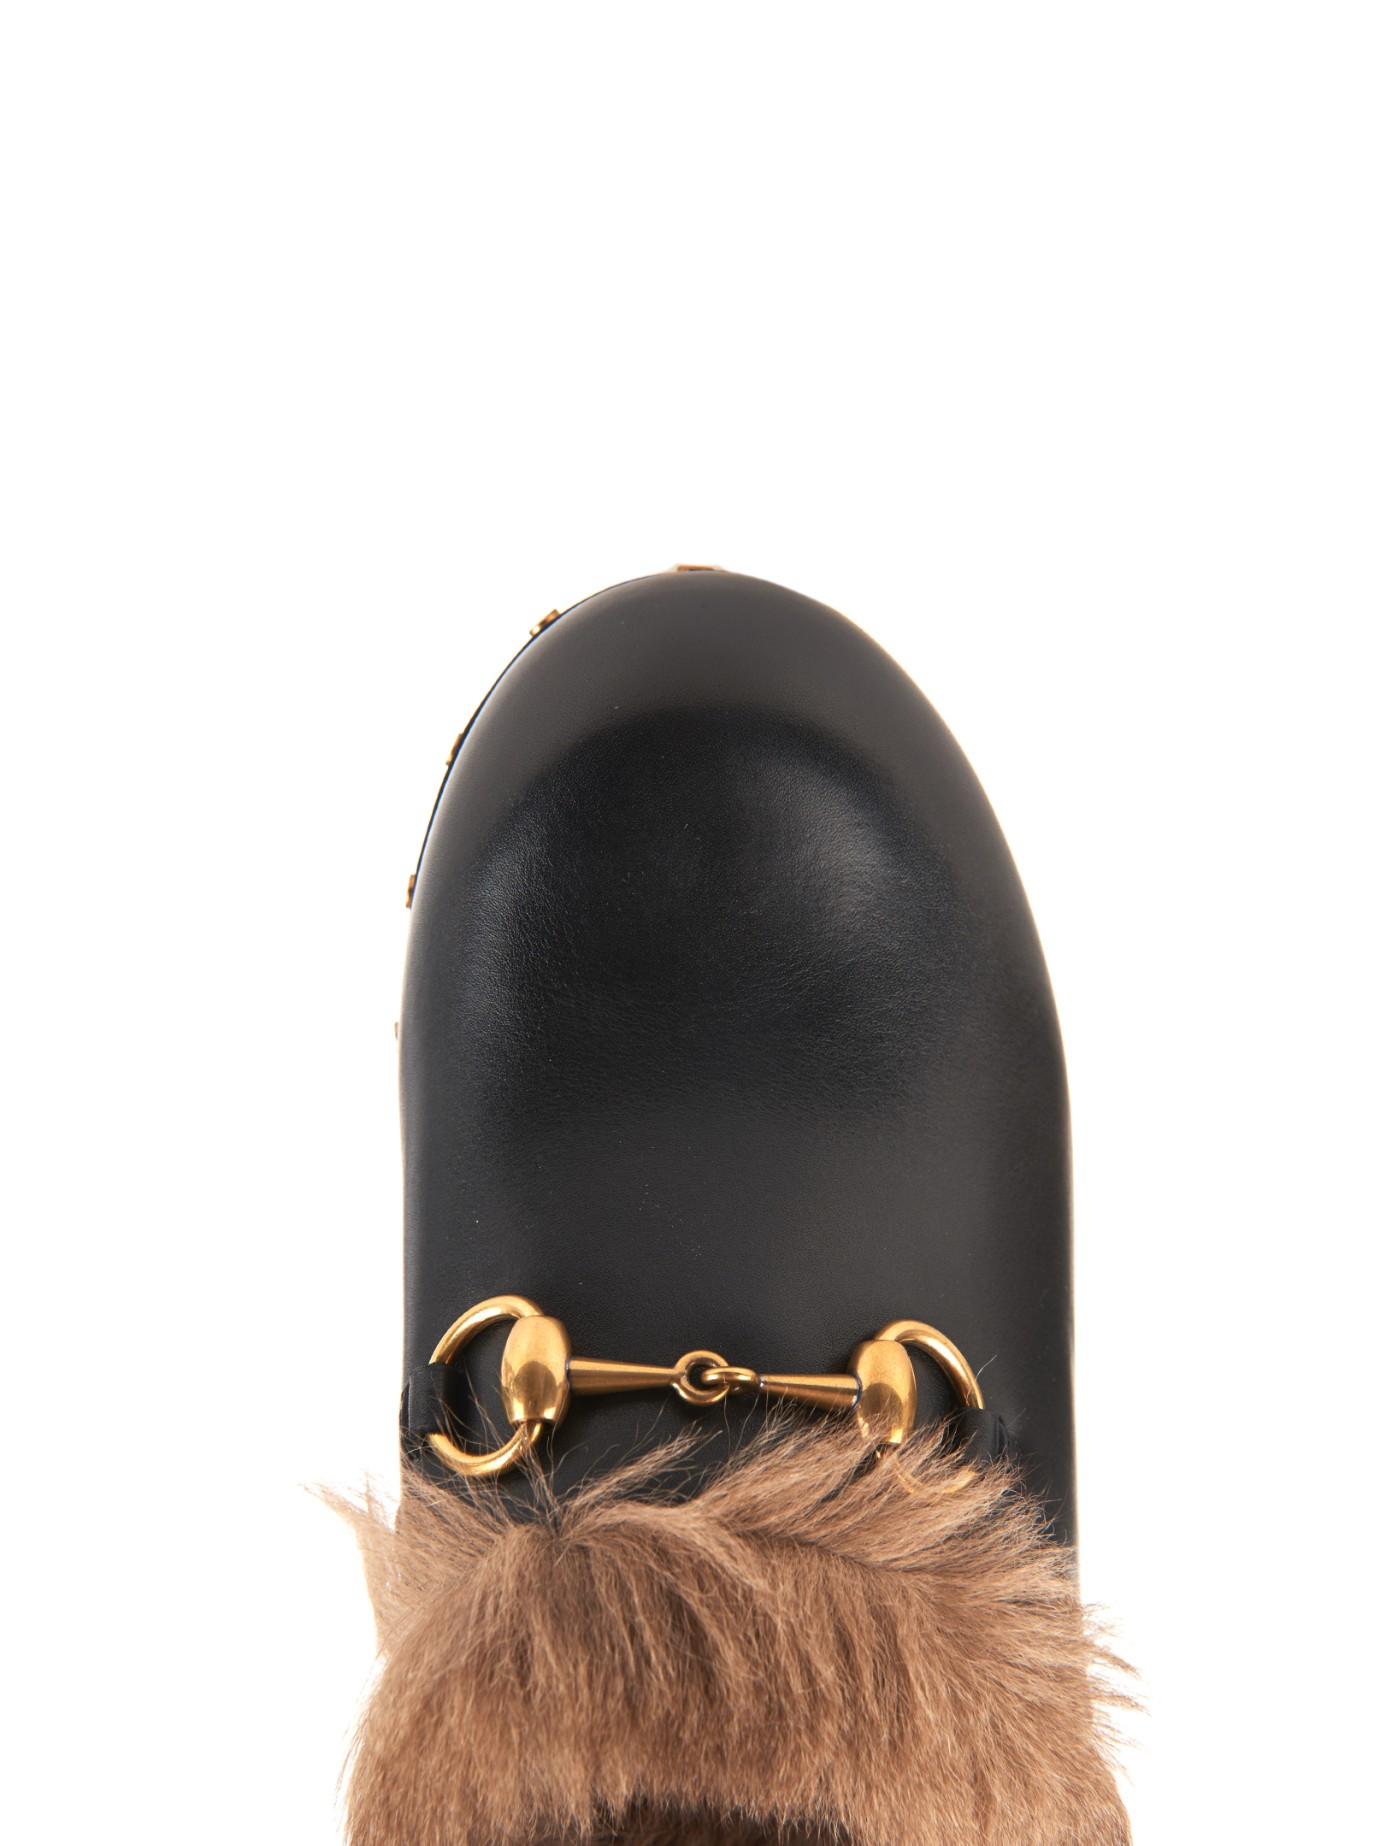 Gucci Amstel Fur-Lined Leather Clogs in Black | Lyst